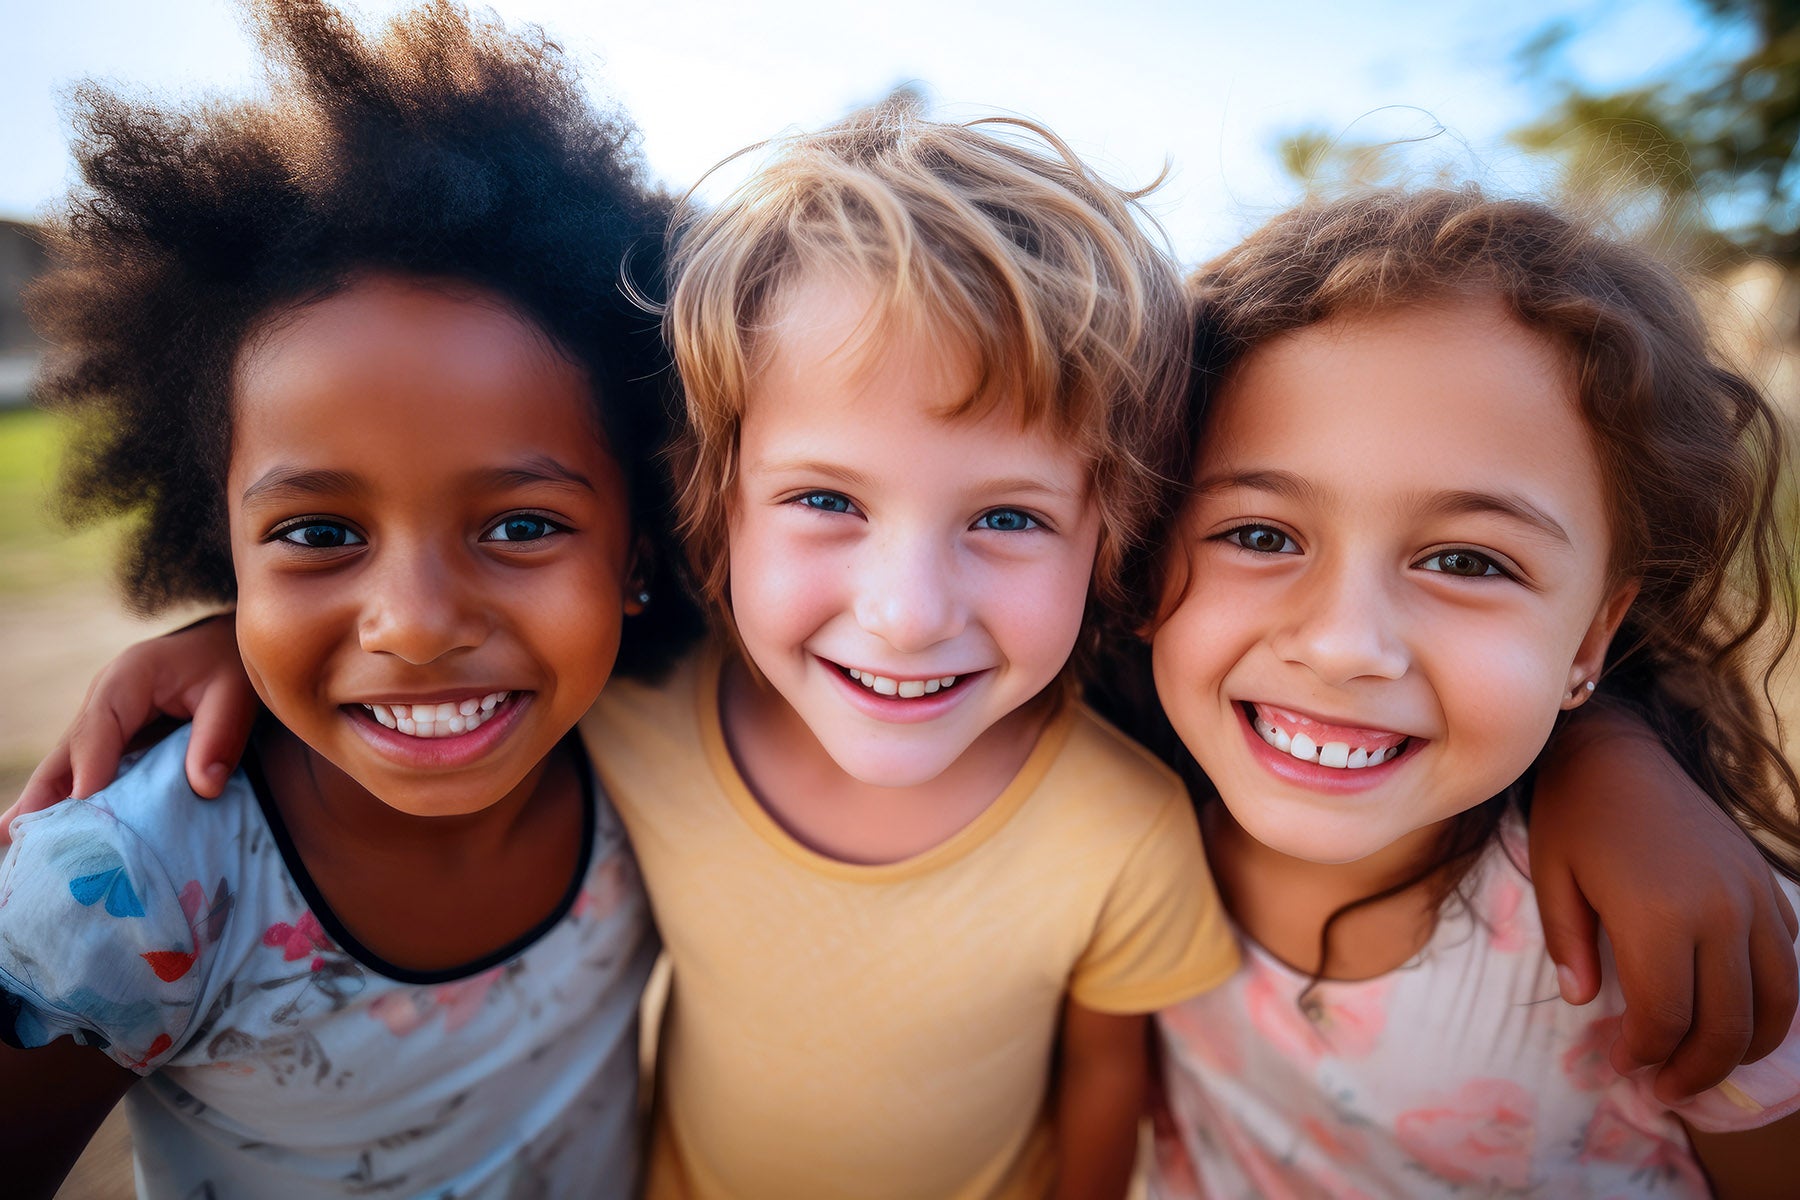 Nurturing Connections: The Vital Role of Social Development in Children